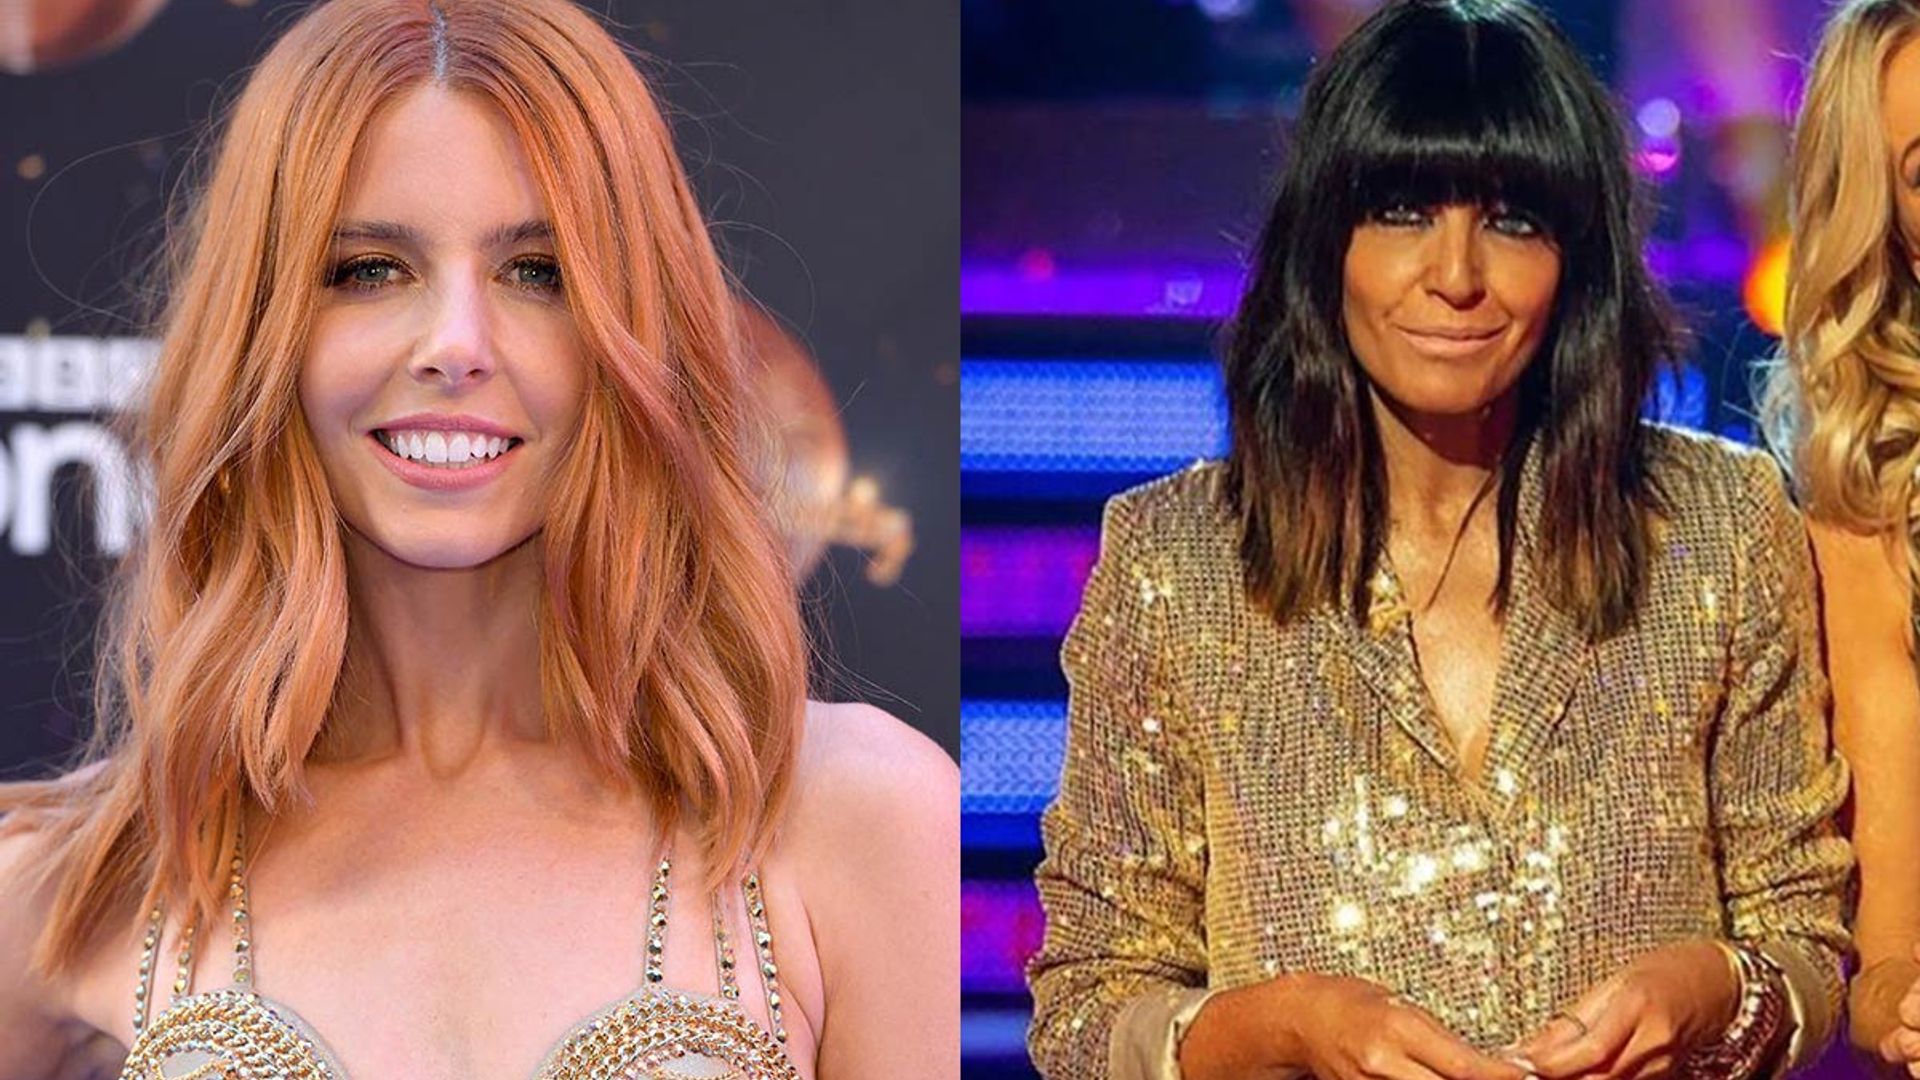 Strictly's Stacey Dooley wears Claudia Winkleman's gold sequin suit on the live tour